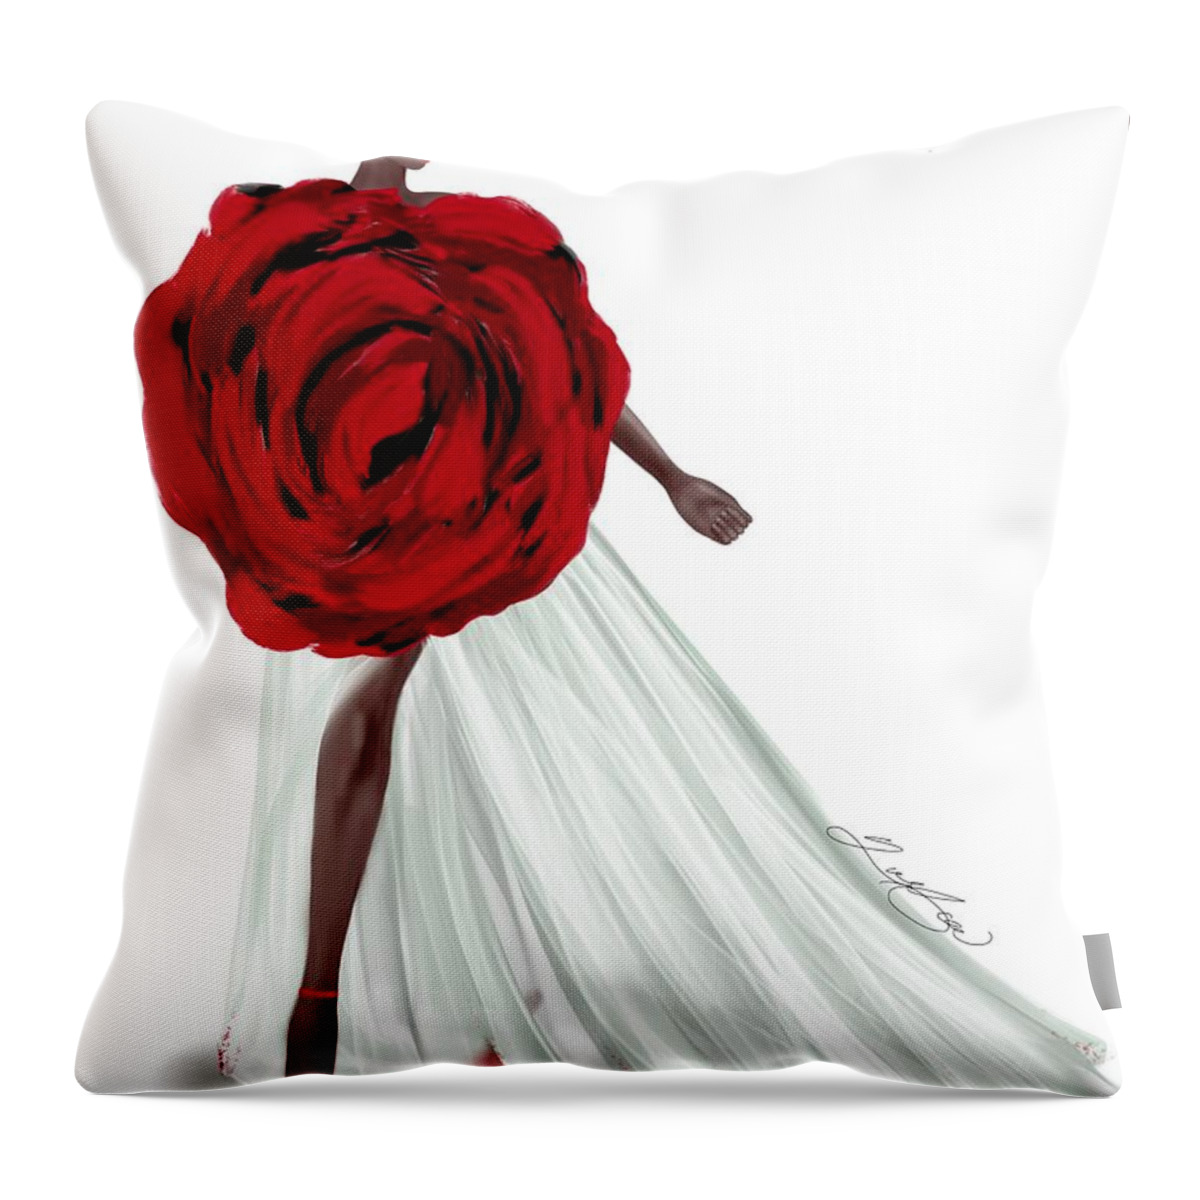 Red Rose Throw Pillow featuring the mixed media My Interpretation of Alexander McQueen Fall 2019 Red Rose Dress by Yolanda Holmon